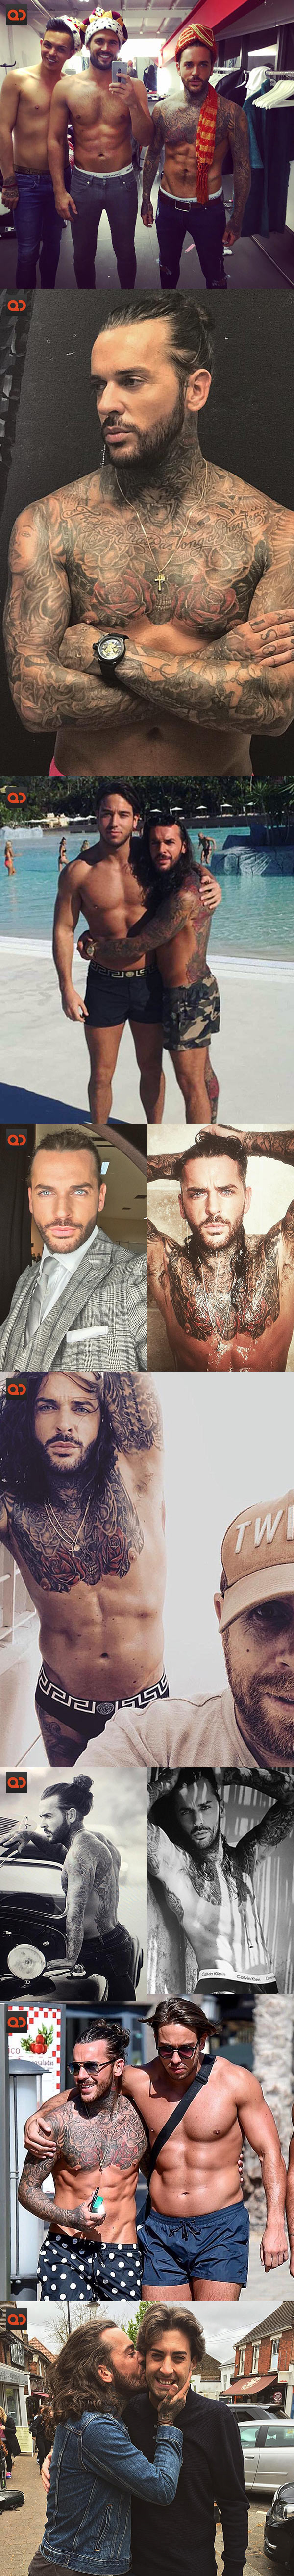 Pete Wicks, From The Only Way Is Essex Series 15, Exposed Cock In Leaked Snap Pic!